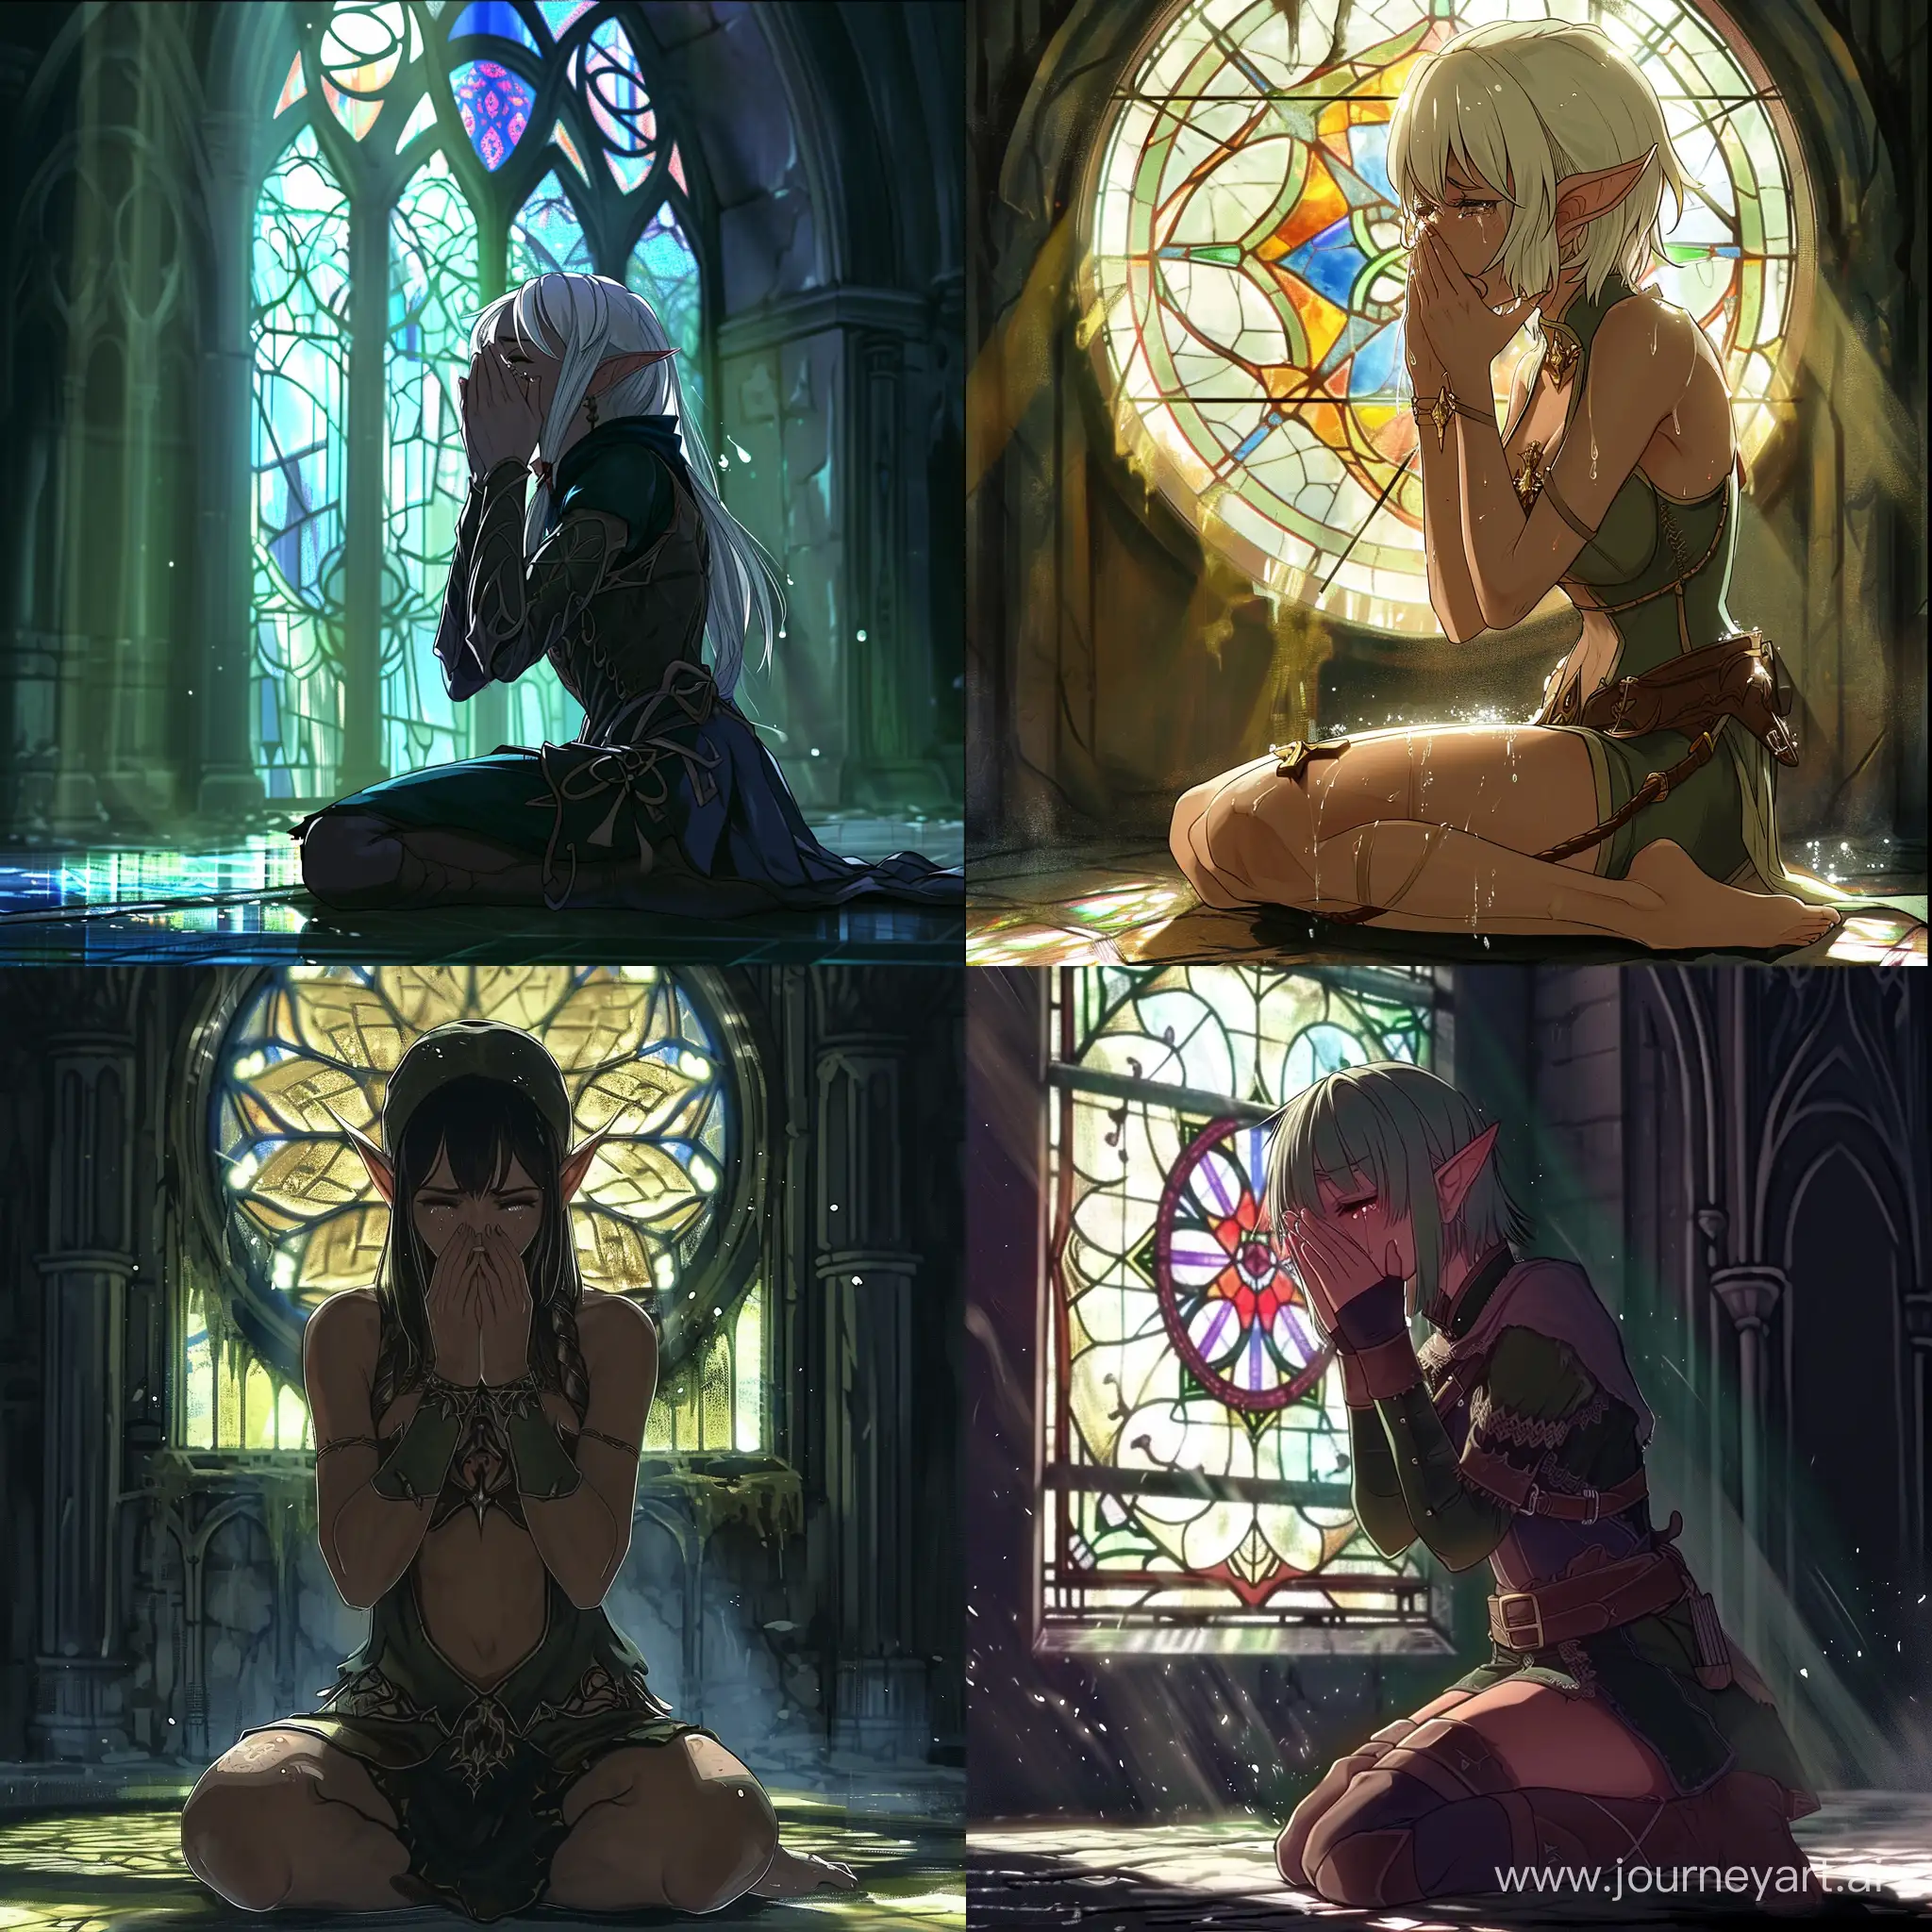 Anime-Elf-Sorceress-in-Emotional-Contemplation-by-Stained-Glass-Window